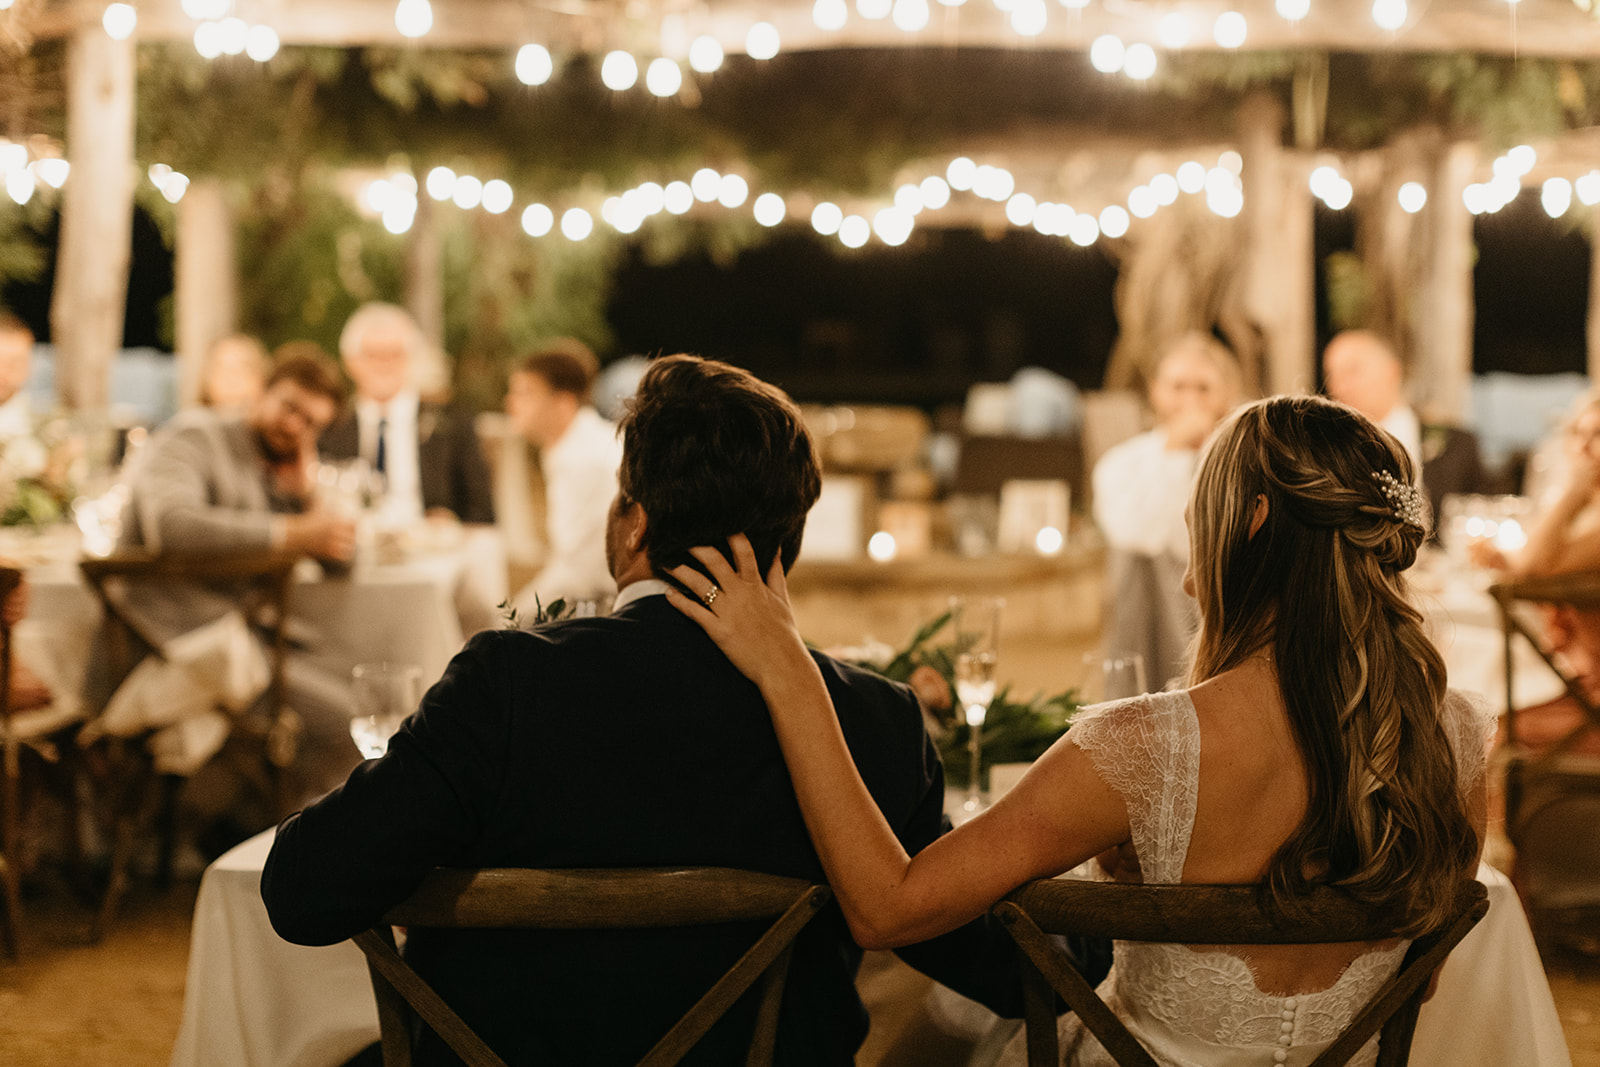 Small, intimate vineyard wedding reception with 20 guests at Roblar Winery